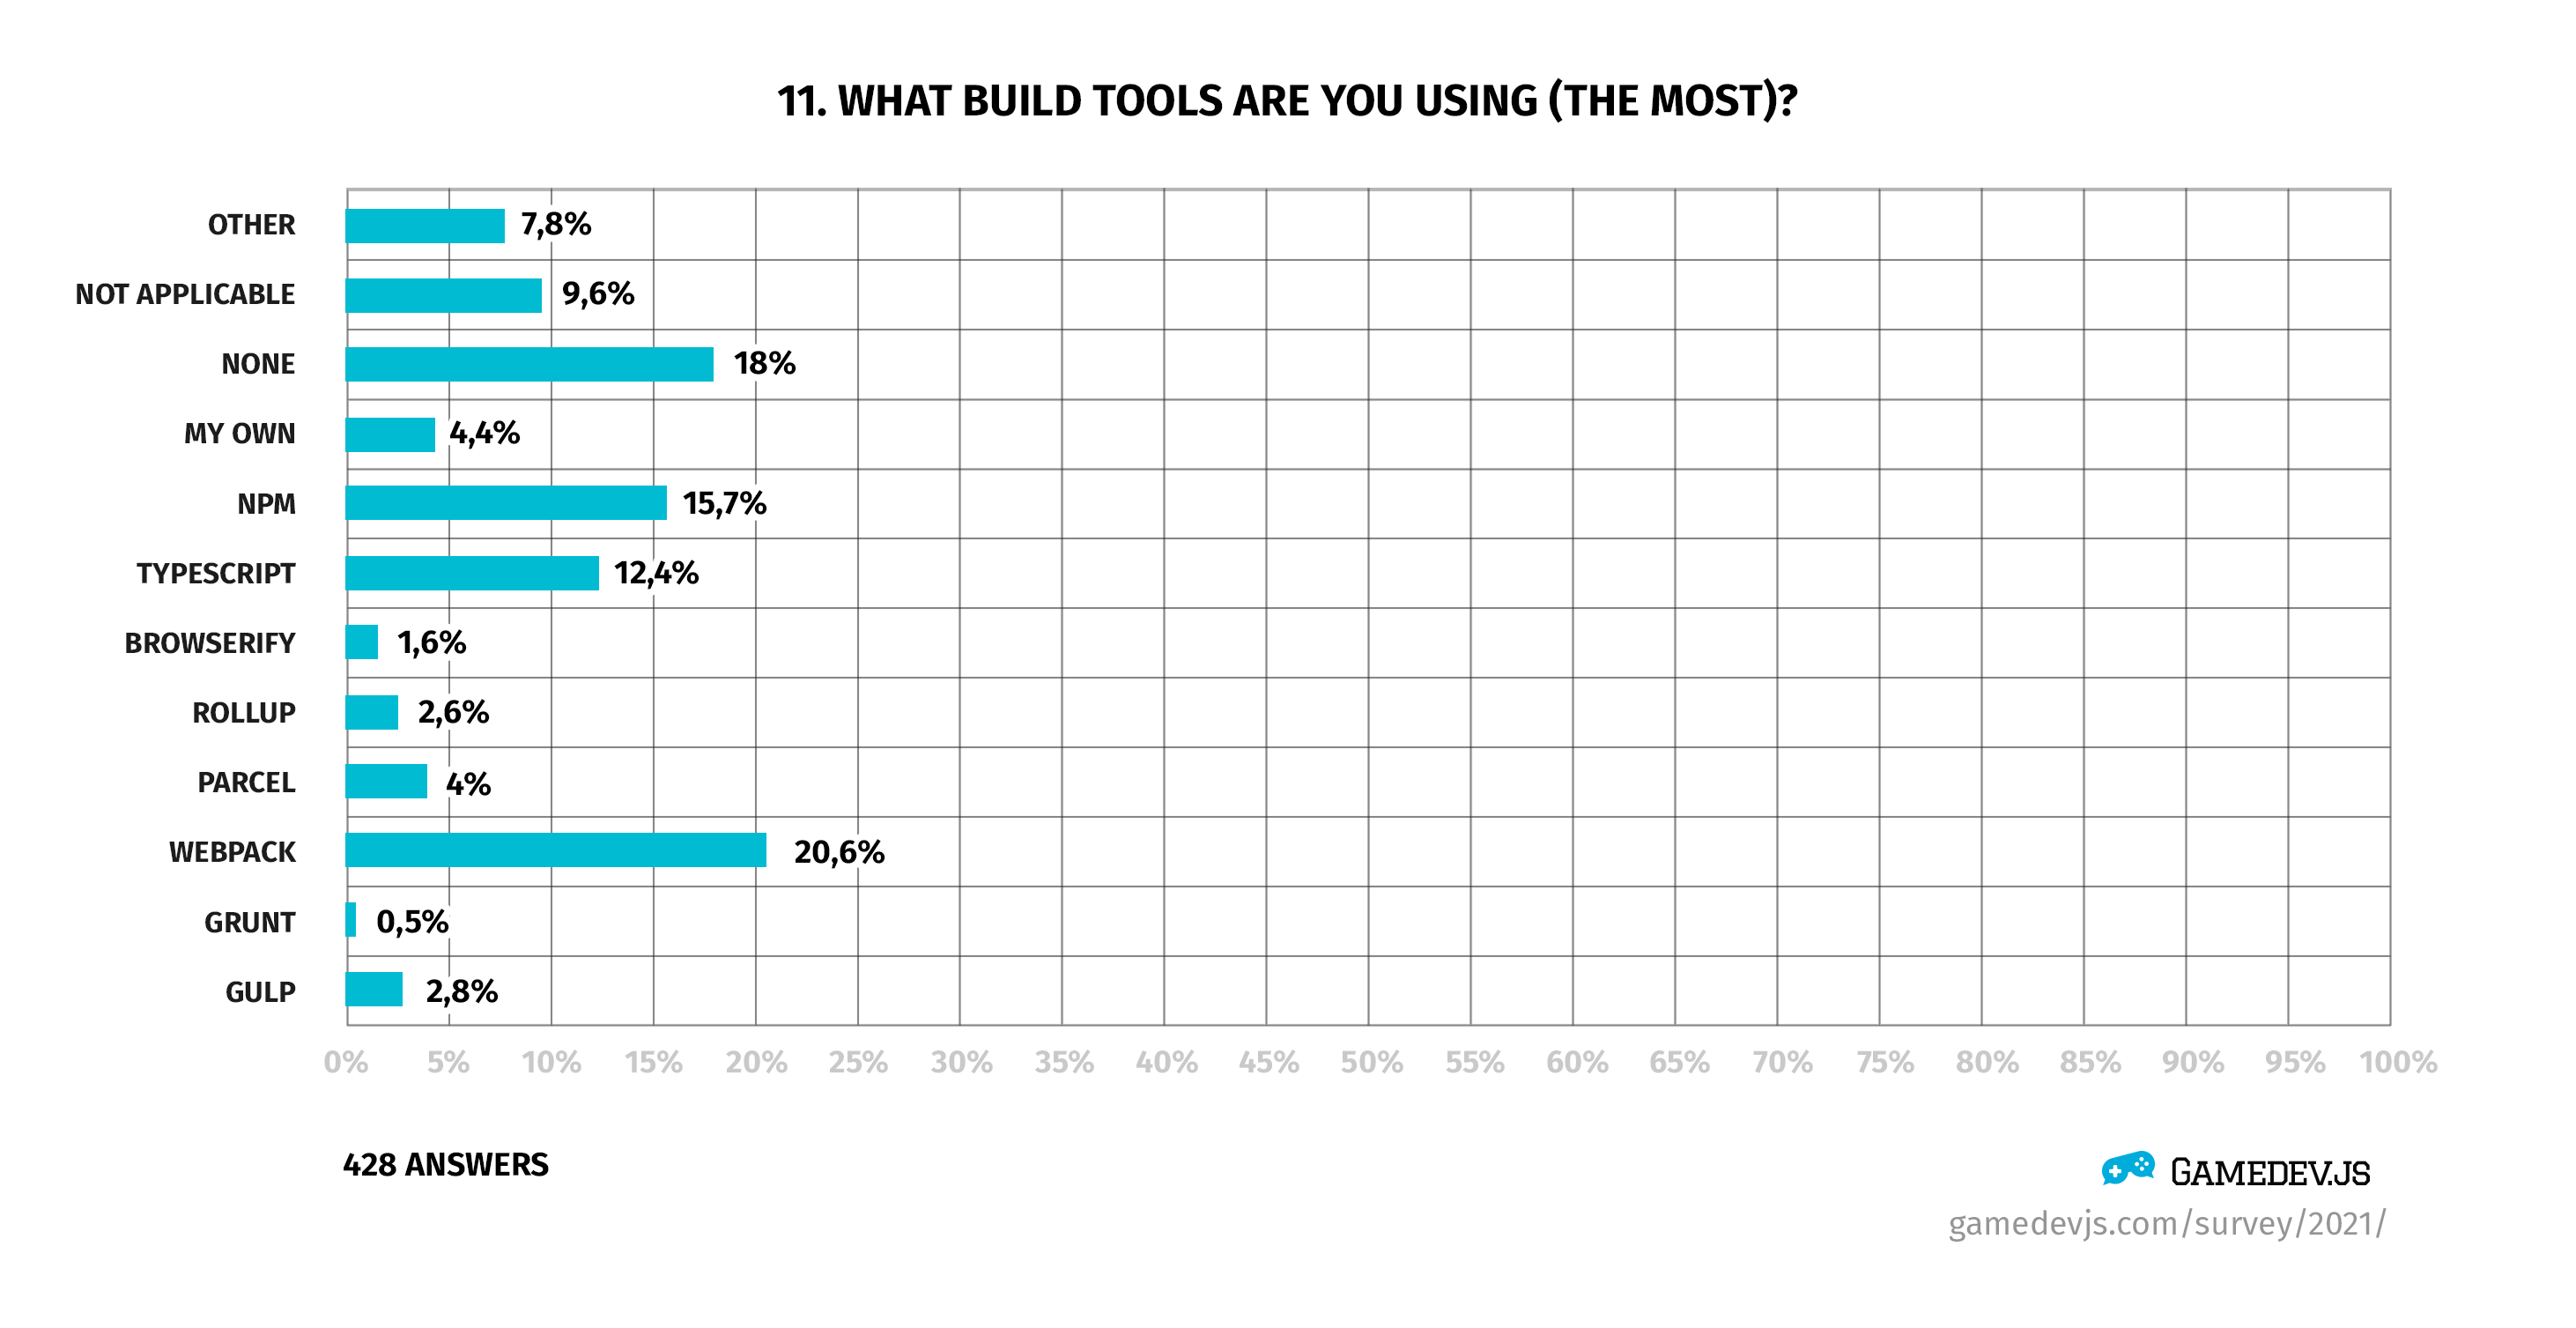 Gamedev.js Survey 2021 - Question #11: What build tools are you using (the most)?